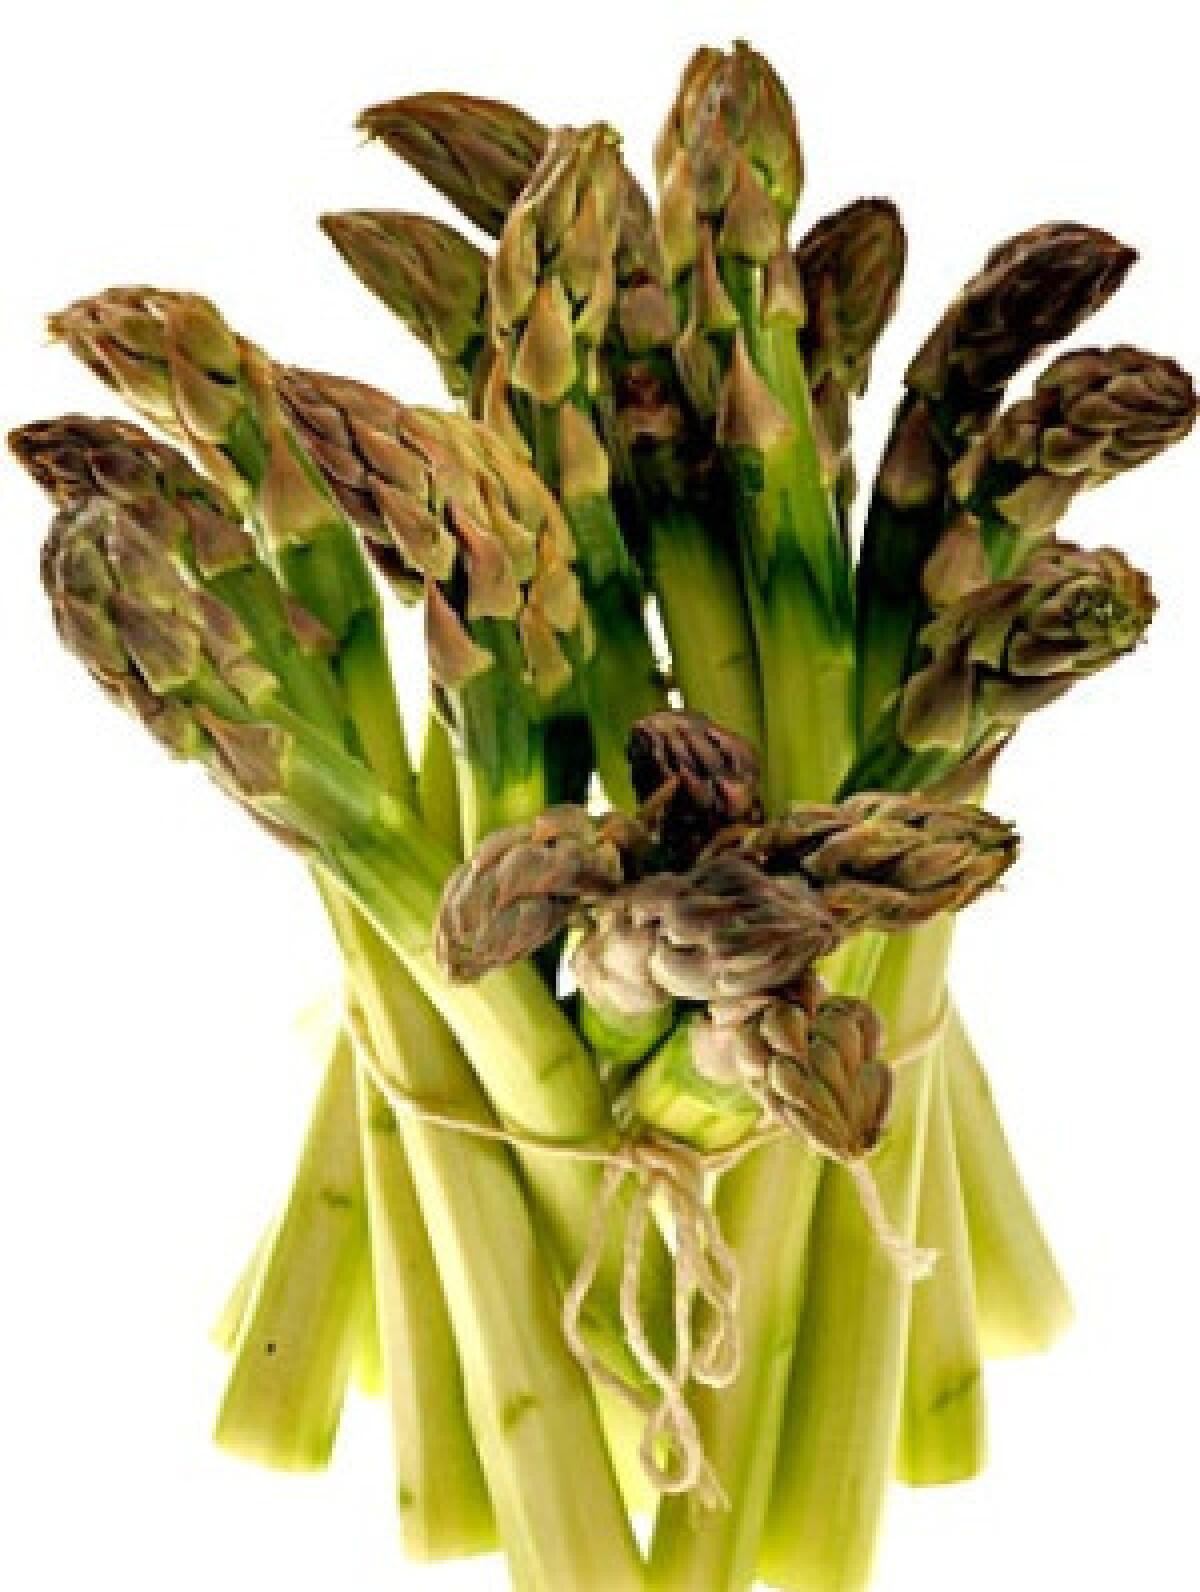 All sizes of asparagus can come from the same set of roots. The biggest come from the very healthiest part, usually near the center.